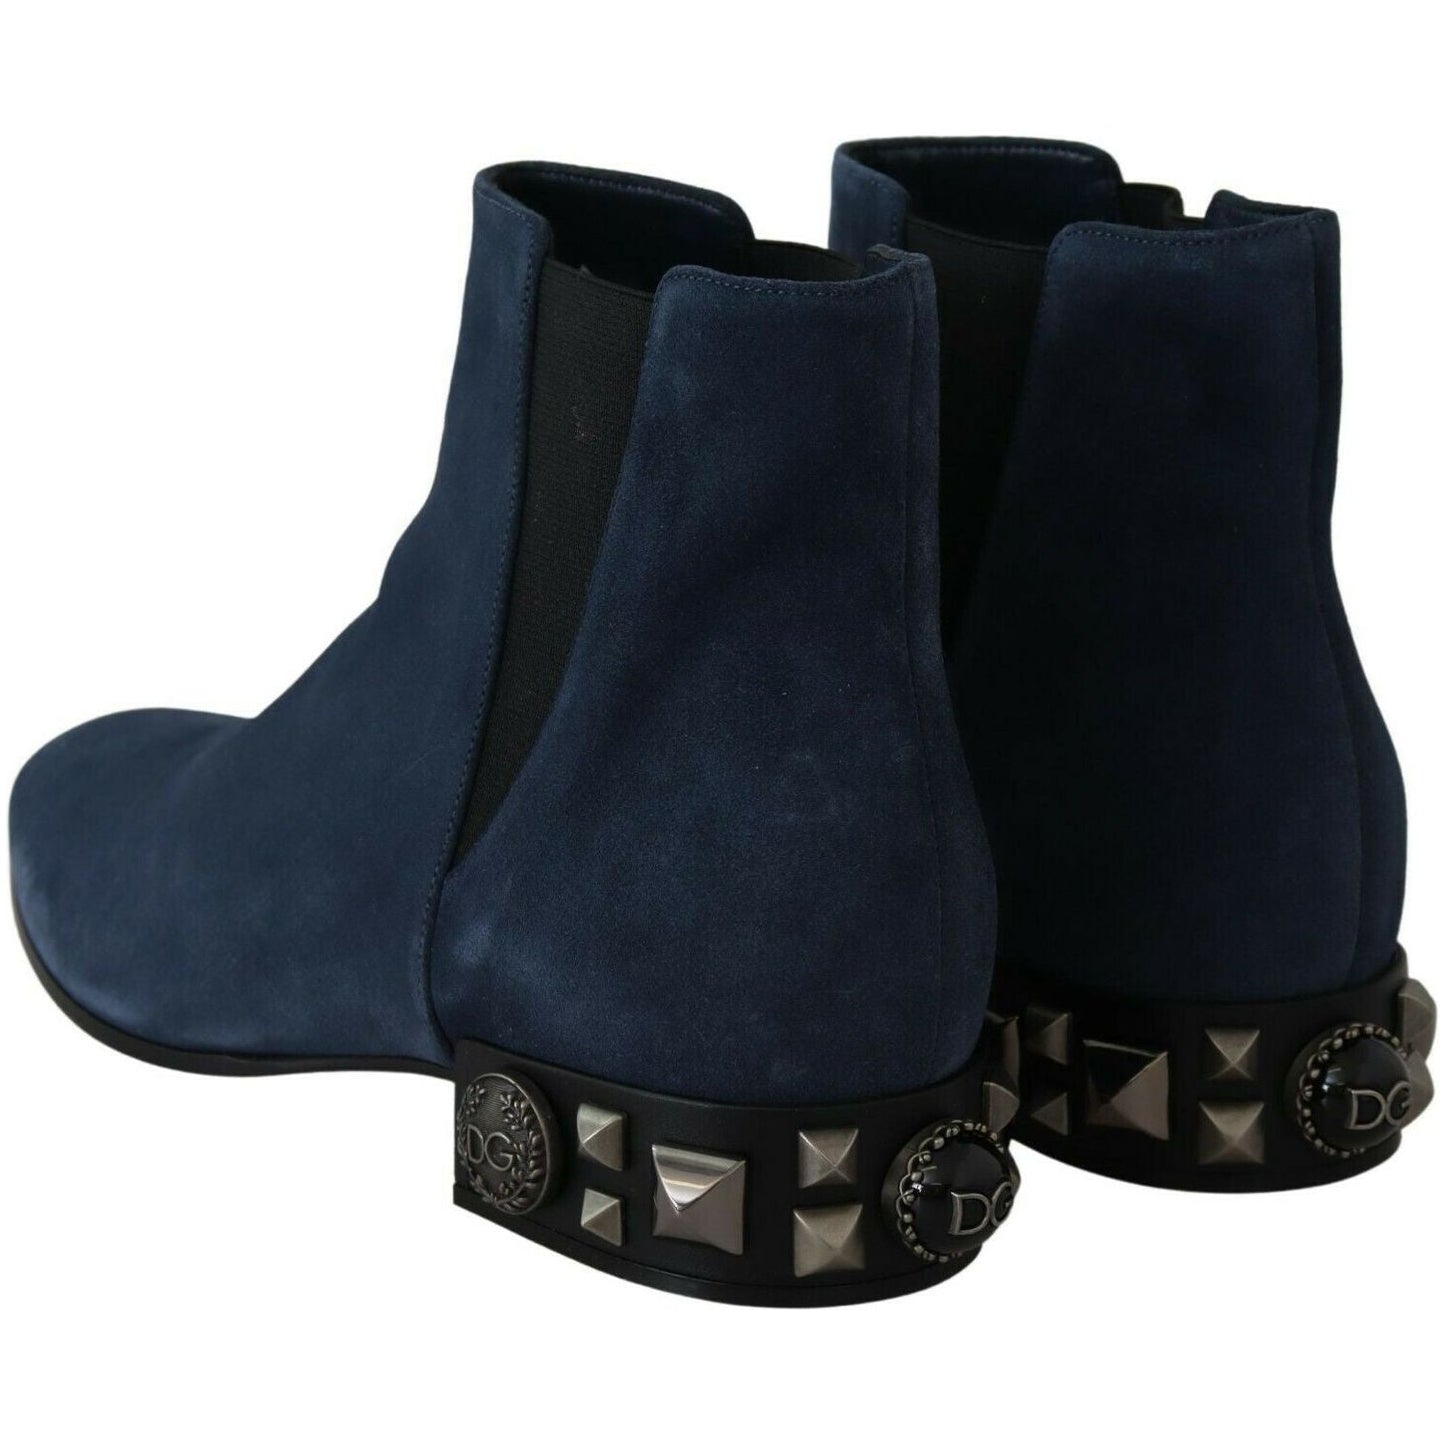 Dolce & Gabbana Chic Blue Suede Mid-Calf Boots with Stud Details blue-suede-embellished-studded-boots-shoes WOMAN BOOTS s-l1600-2022-06-30T120618.227-3f0f255d-773.jpg